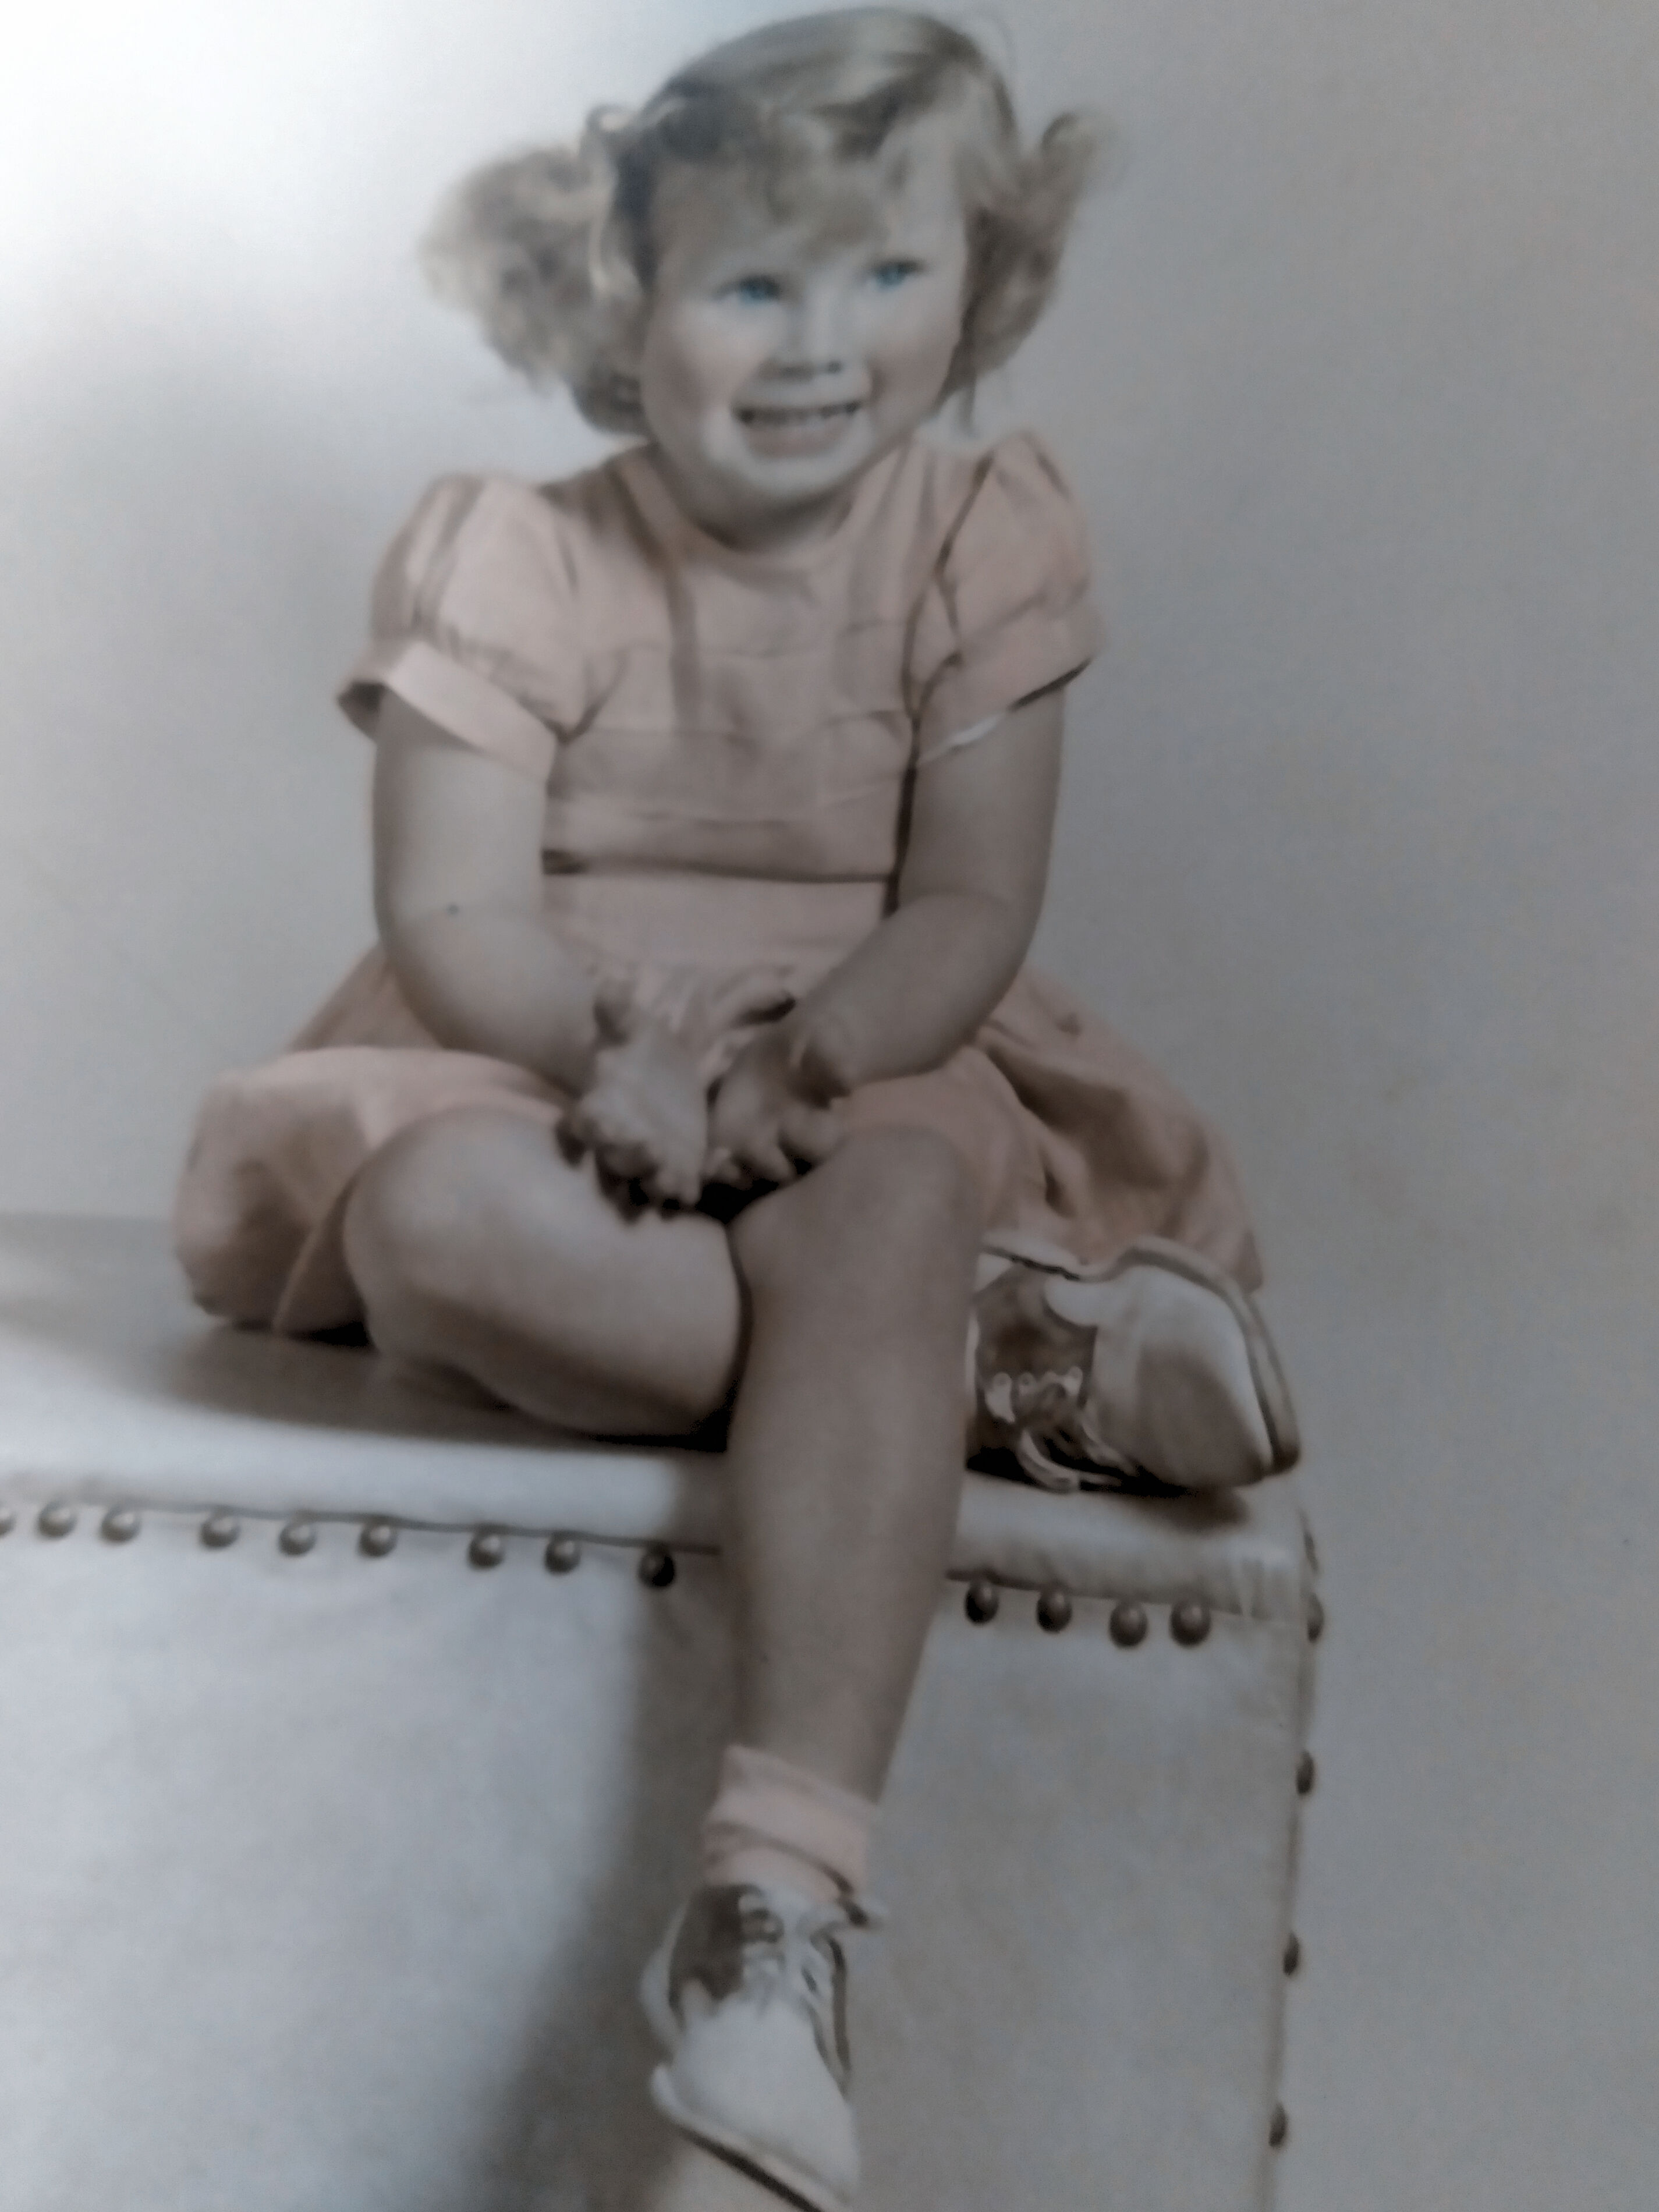 My parents waited years for a daughter. I was born in 1948, blonde and blue eyed little girl joined two brothers 12 and 10. 